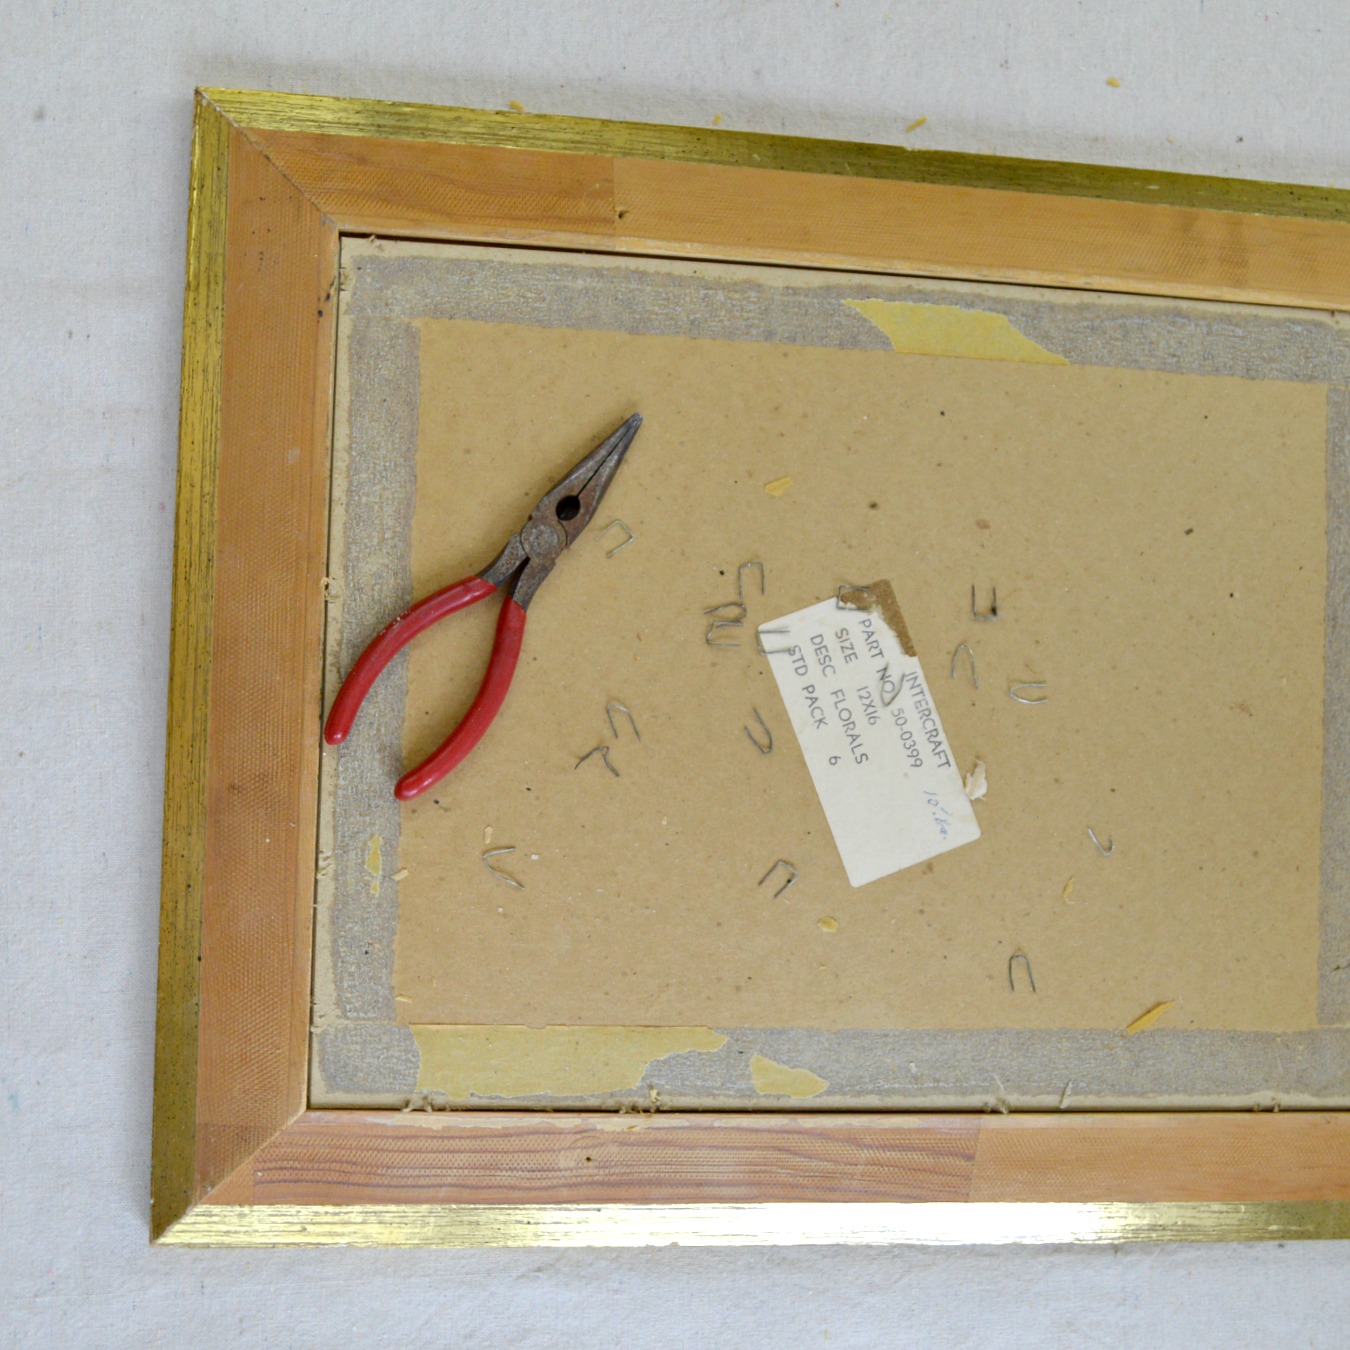 take apart the picture frame